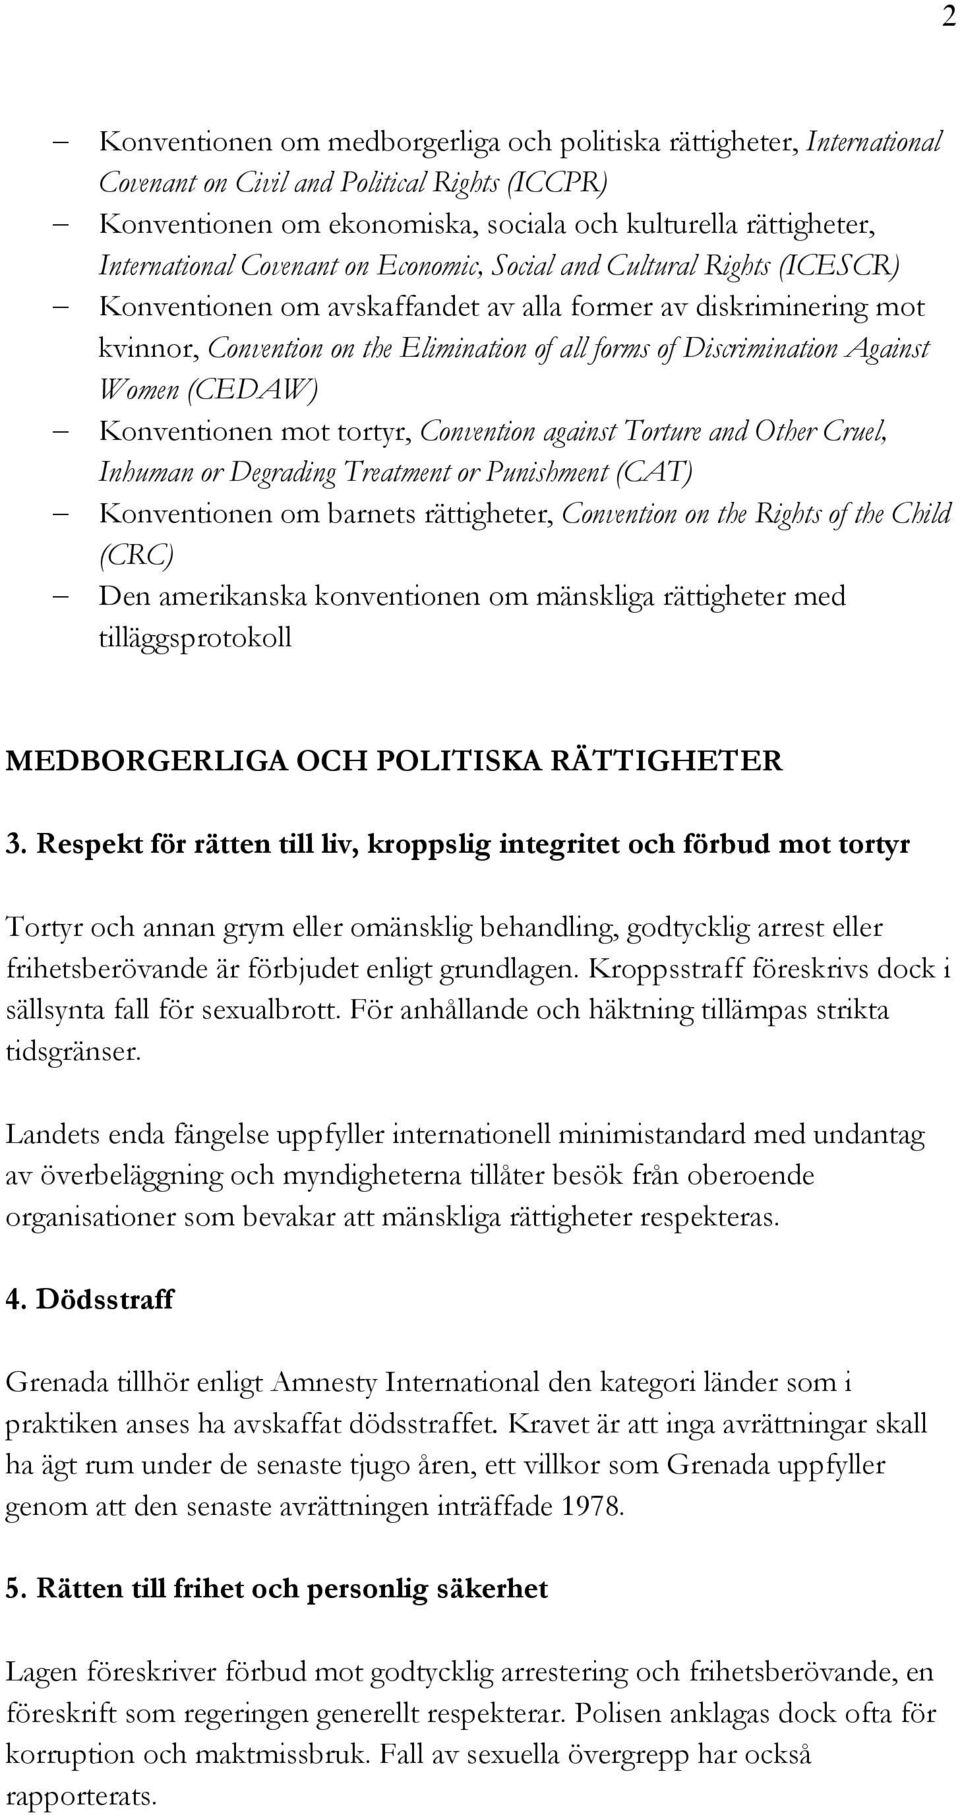 Against Women (CEDAW) Konventionen mot tortyr, Convention against Torture and Other Cruel, Inhuman or Degrading Treatment or Punishment (CAT) Konventionen om barnets rättigheter, Convention on the